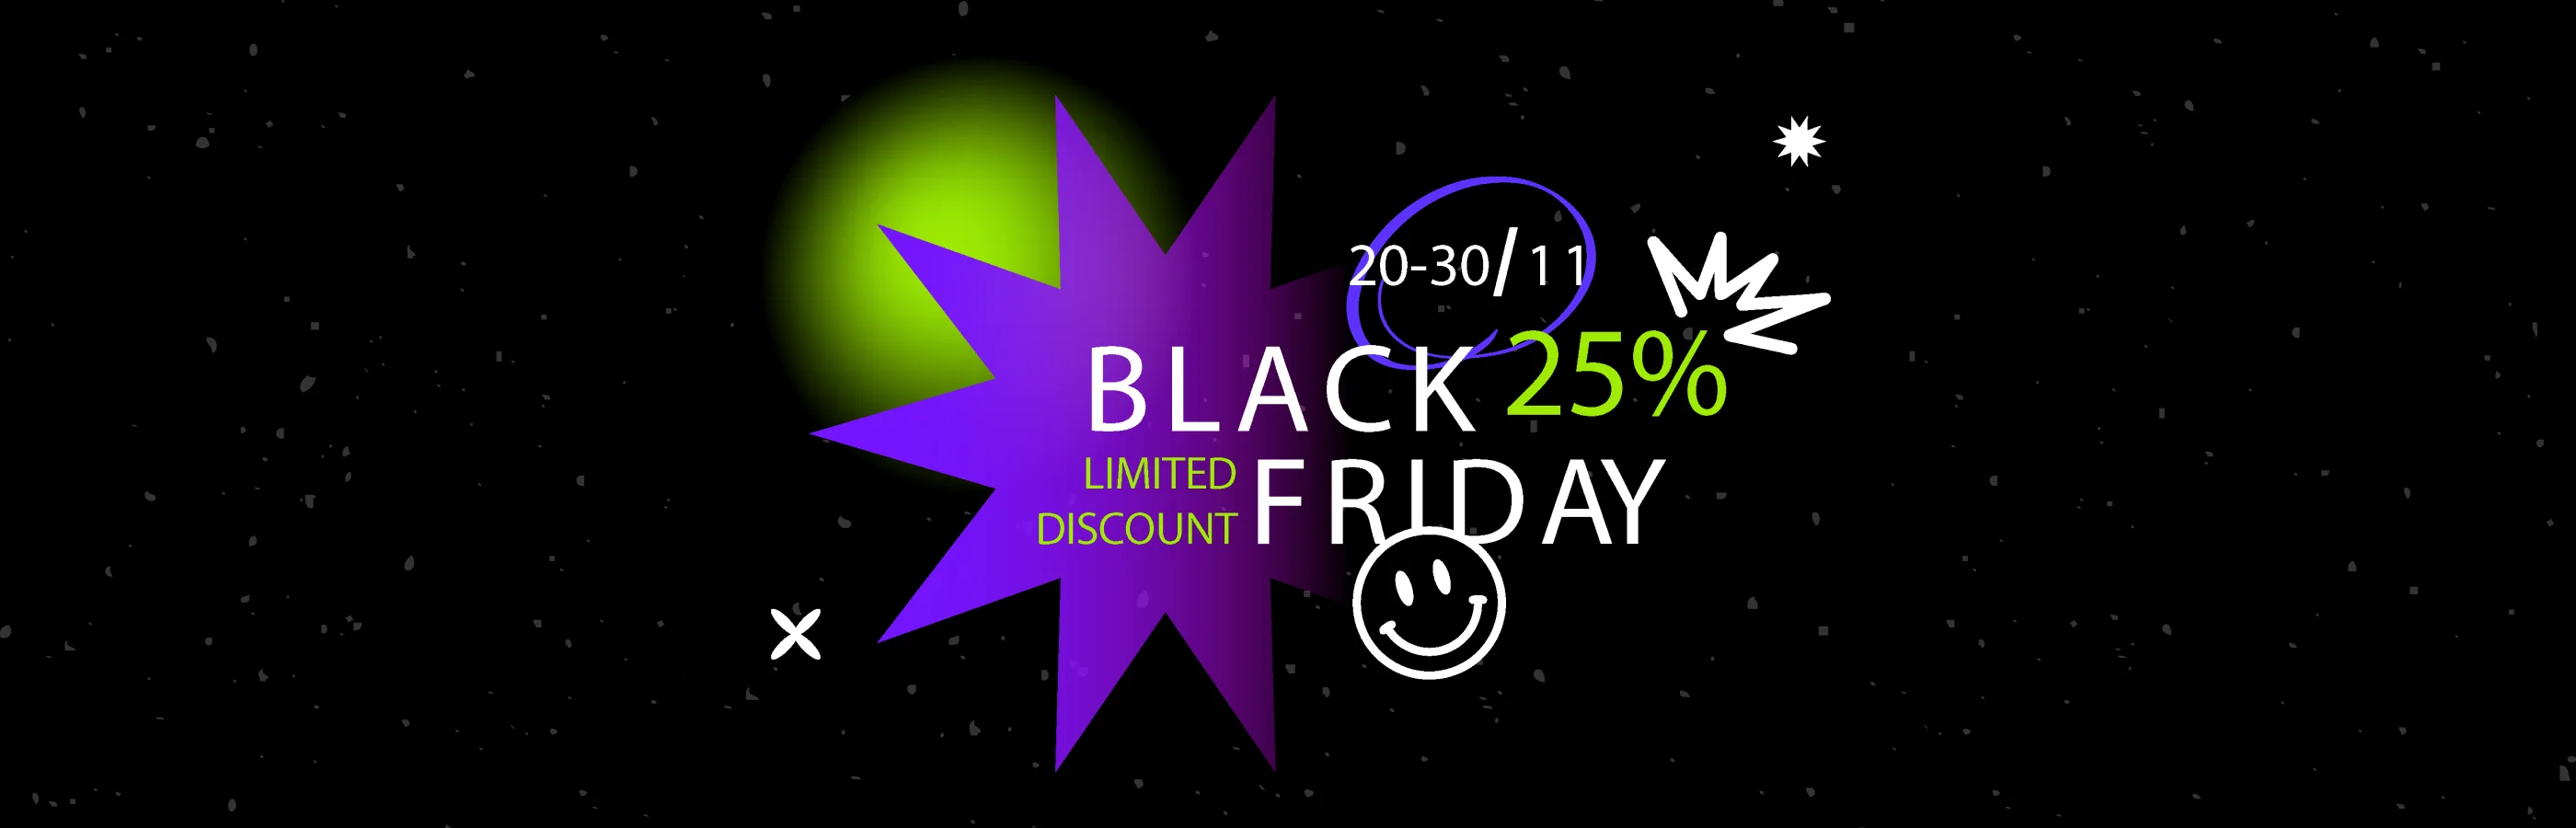 Black Friday 2023 - Giving discounts up to -25%! Spin the wheel and win promo codes!